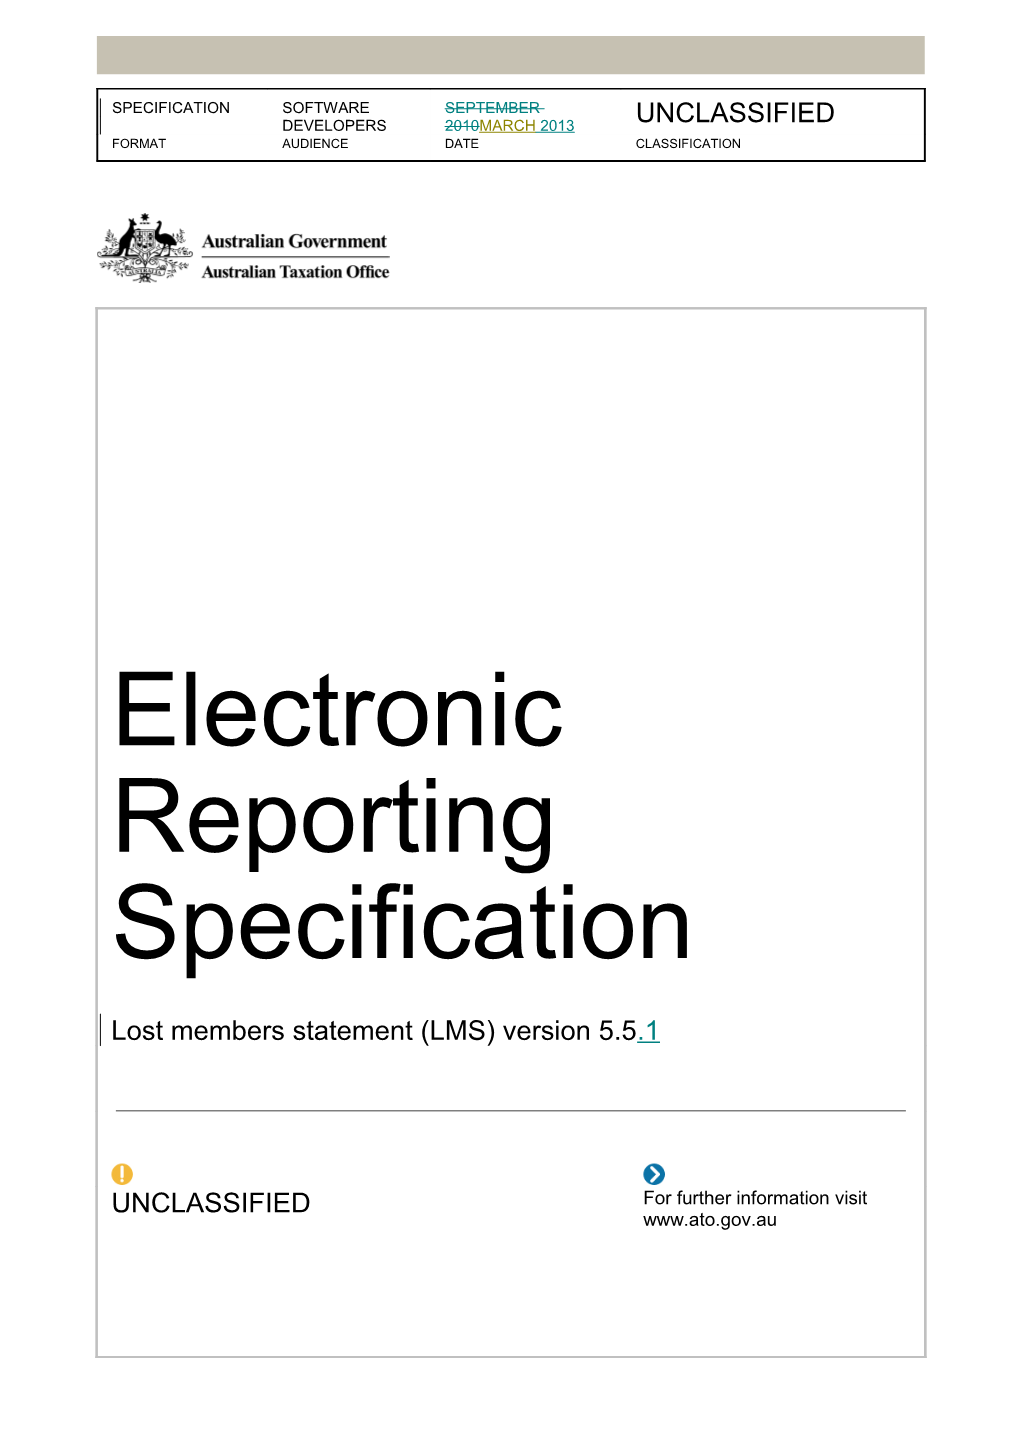 Electronic Reporting Specification - Lost Members Statement